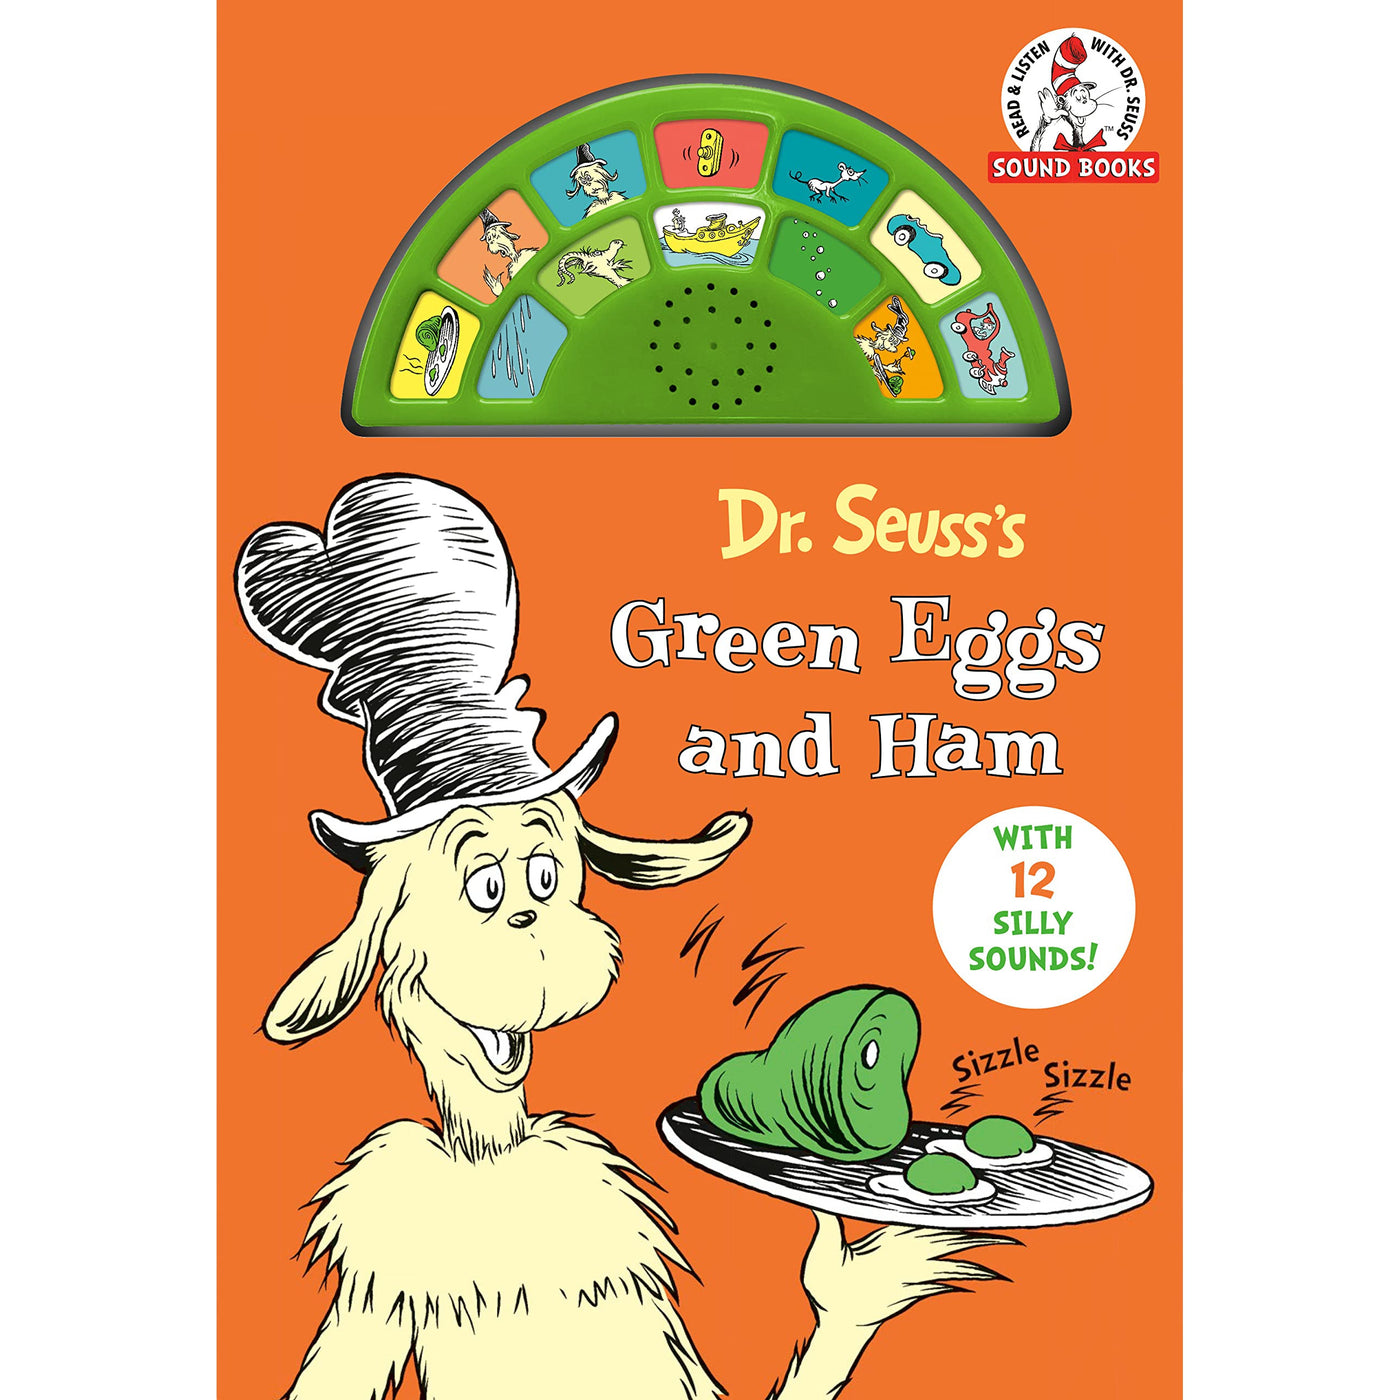 Dr. Seuss's Green Eggs And Ham: With 12 Silly Sounds